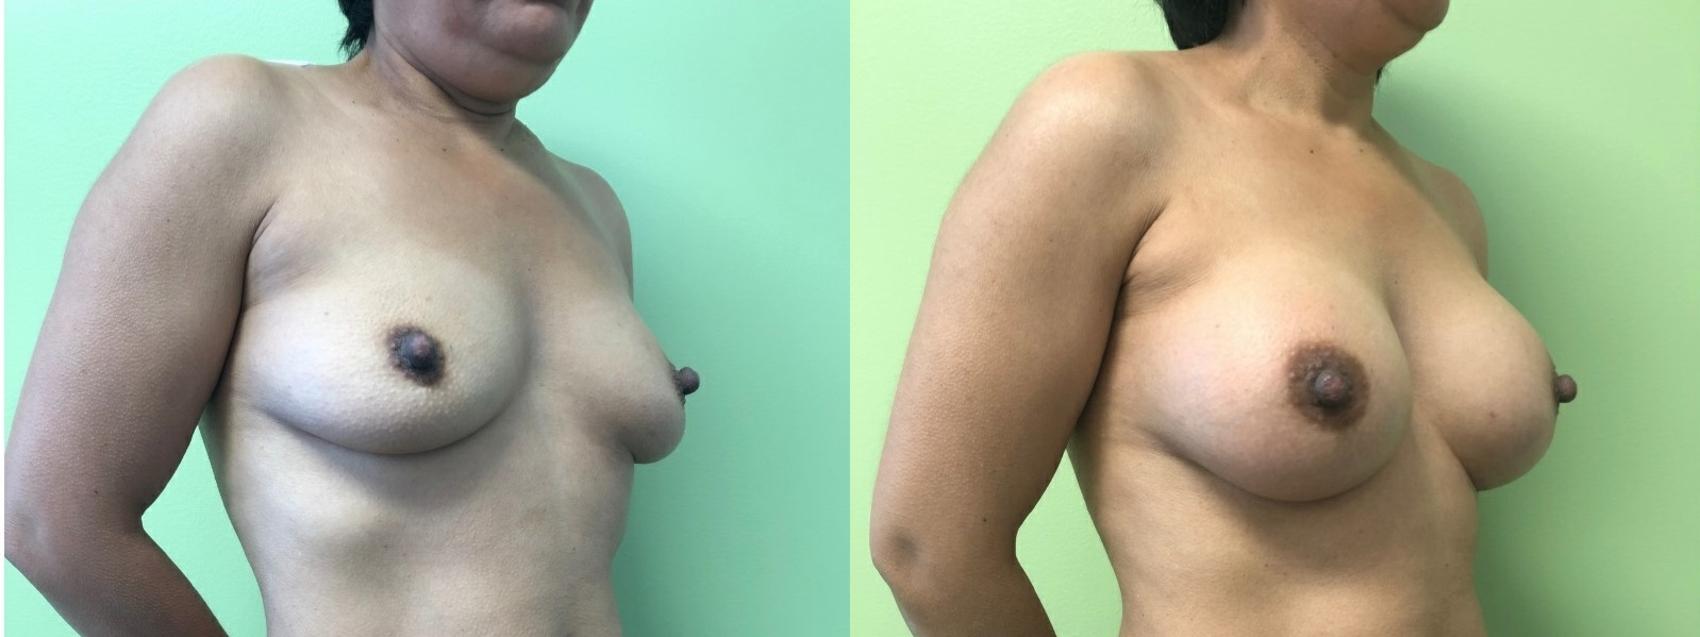 Breast Augmentation Before & After Photo | San Francisco, CA | Kaiser Permanente Cosmetic Services